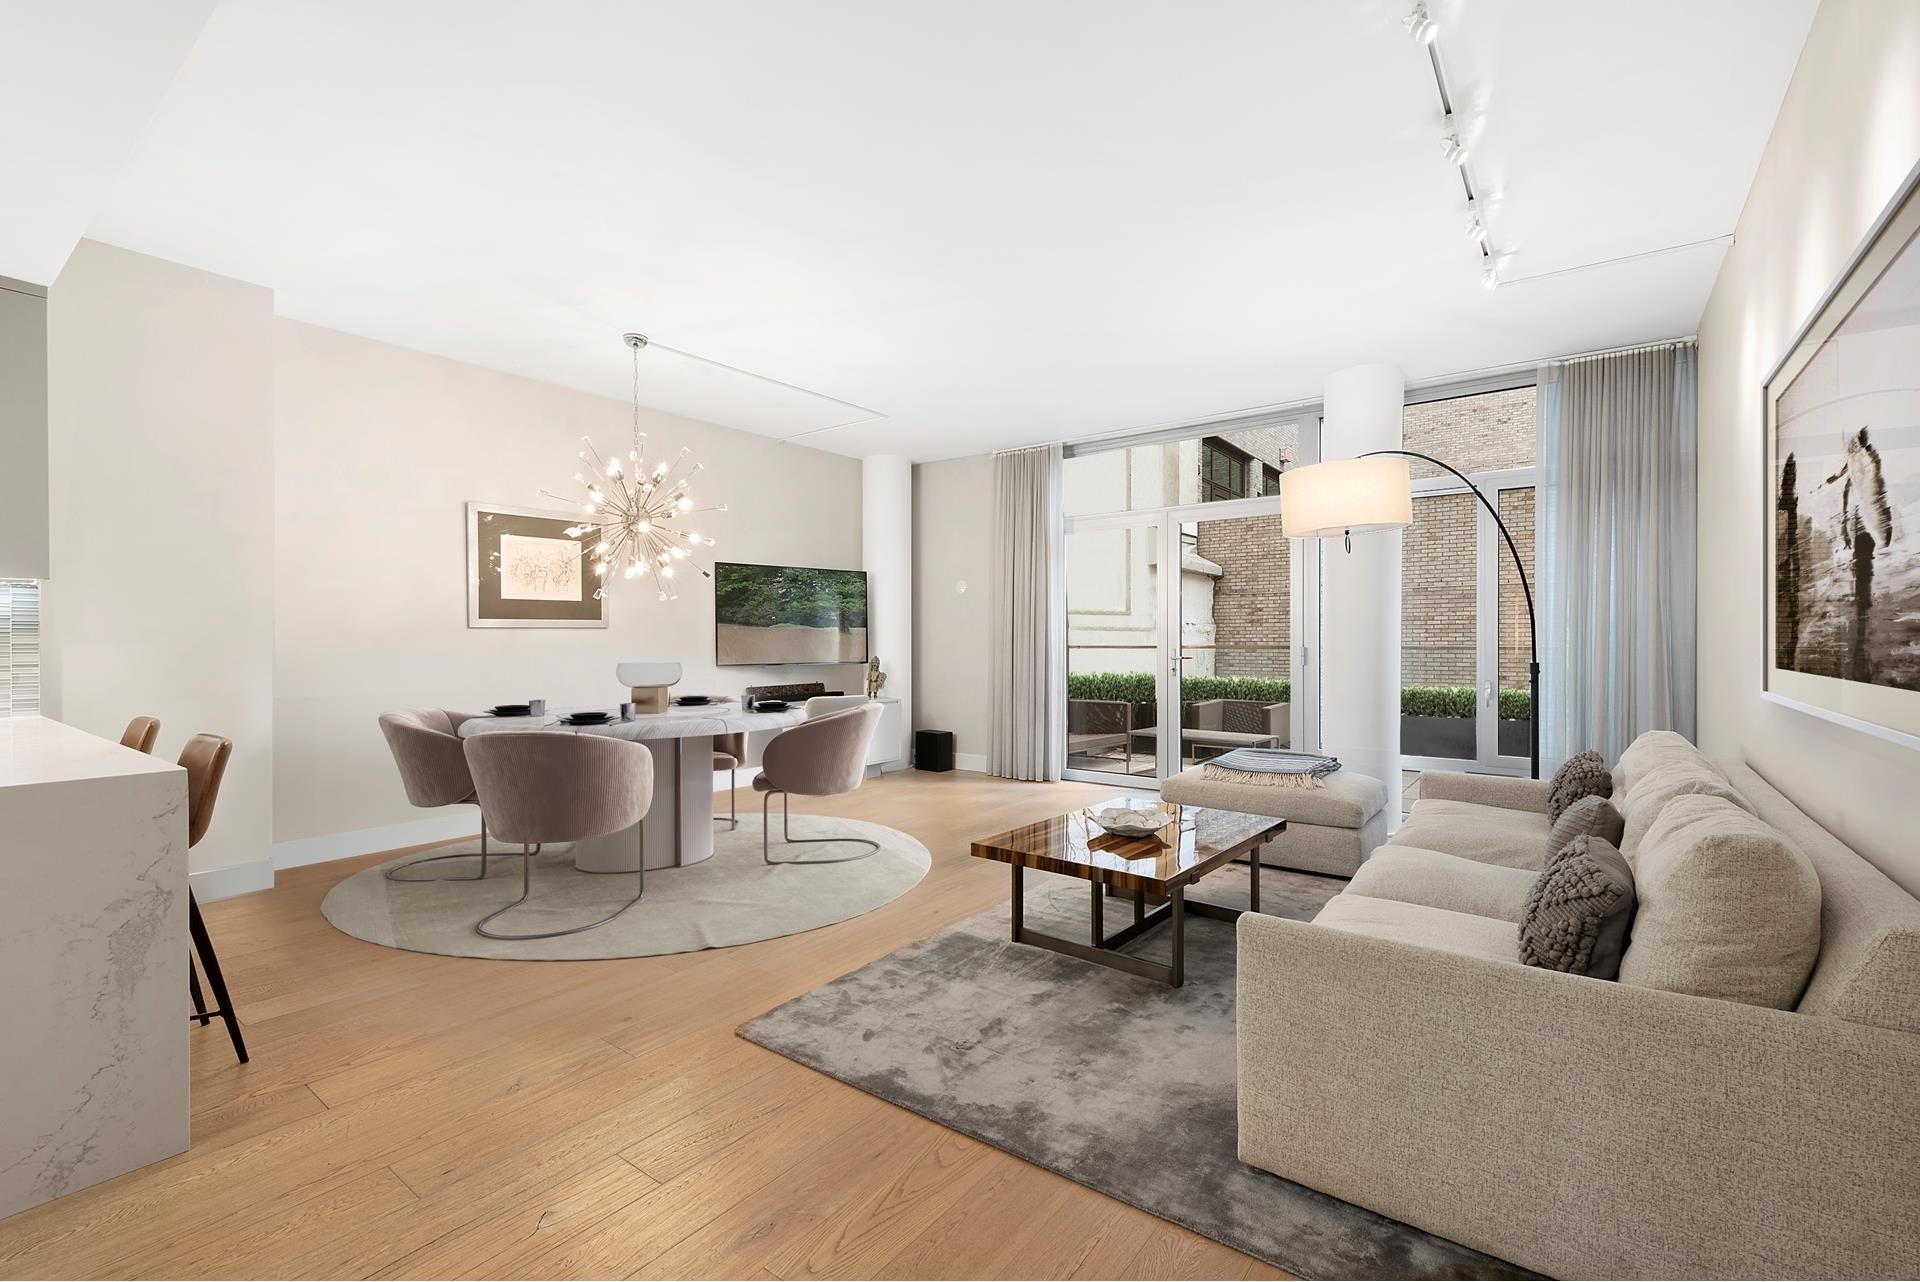 Condominium for Sale at 520 WEST CHELSEA, 520 W 19TH ST, 2C Chelsea, New York, New York 10011